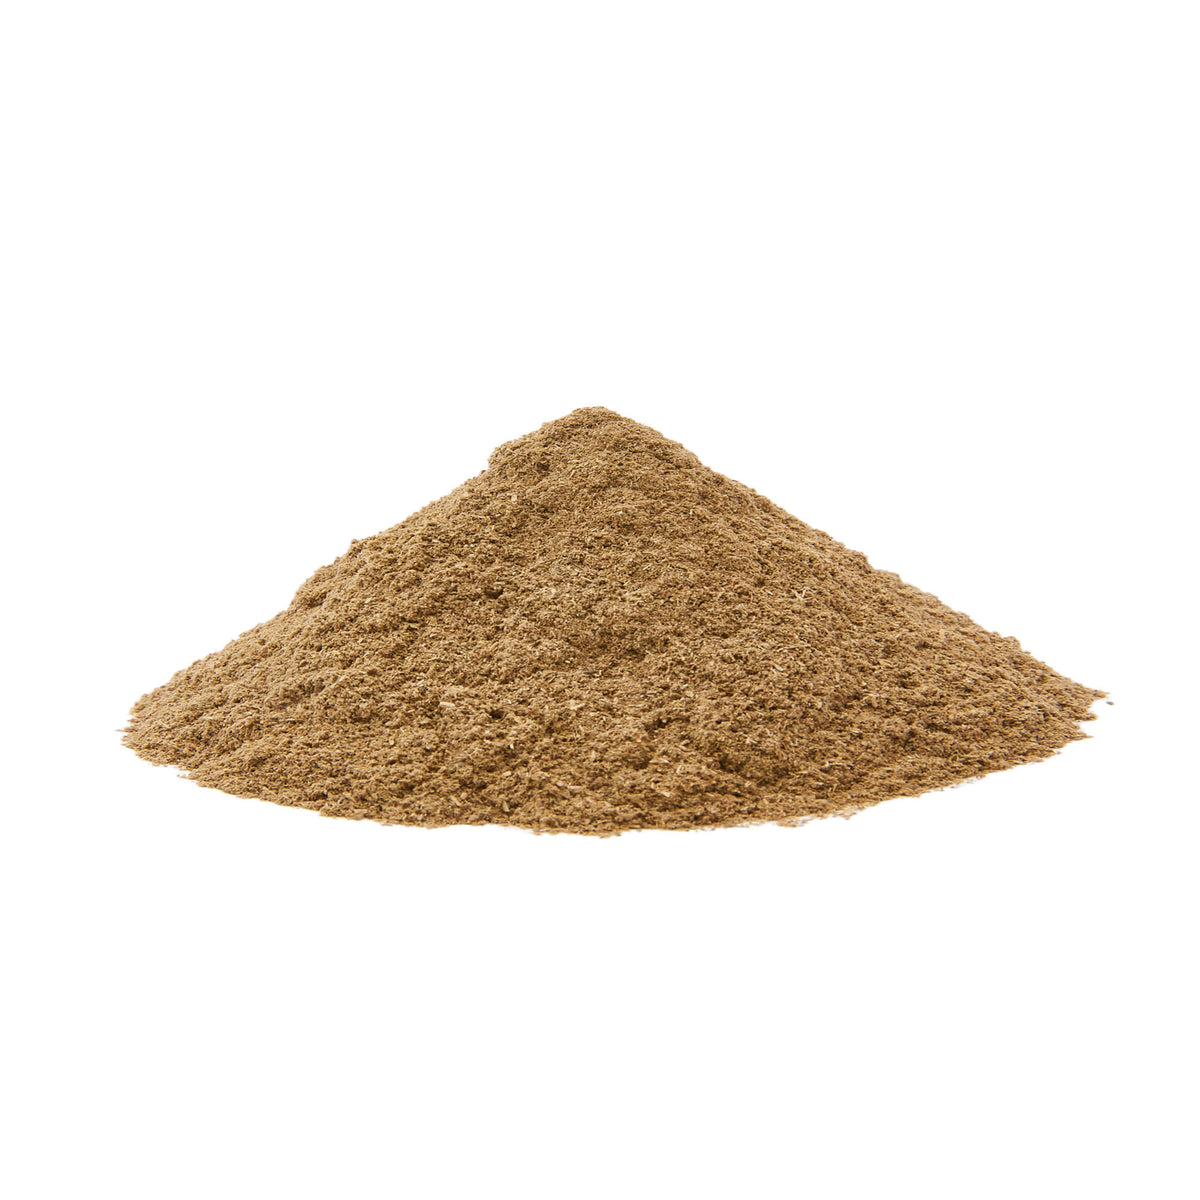 Organic Gotu Kola Powder | Raw Living UK | Tonic Herbs | Super Foods | Raw Living Gotu Kola: a natural plant food, one of the most important, rejuvenating herbs in Ayurvedic medicine. Use as a culinary ingredient, or in smoothies.